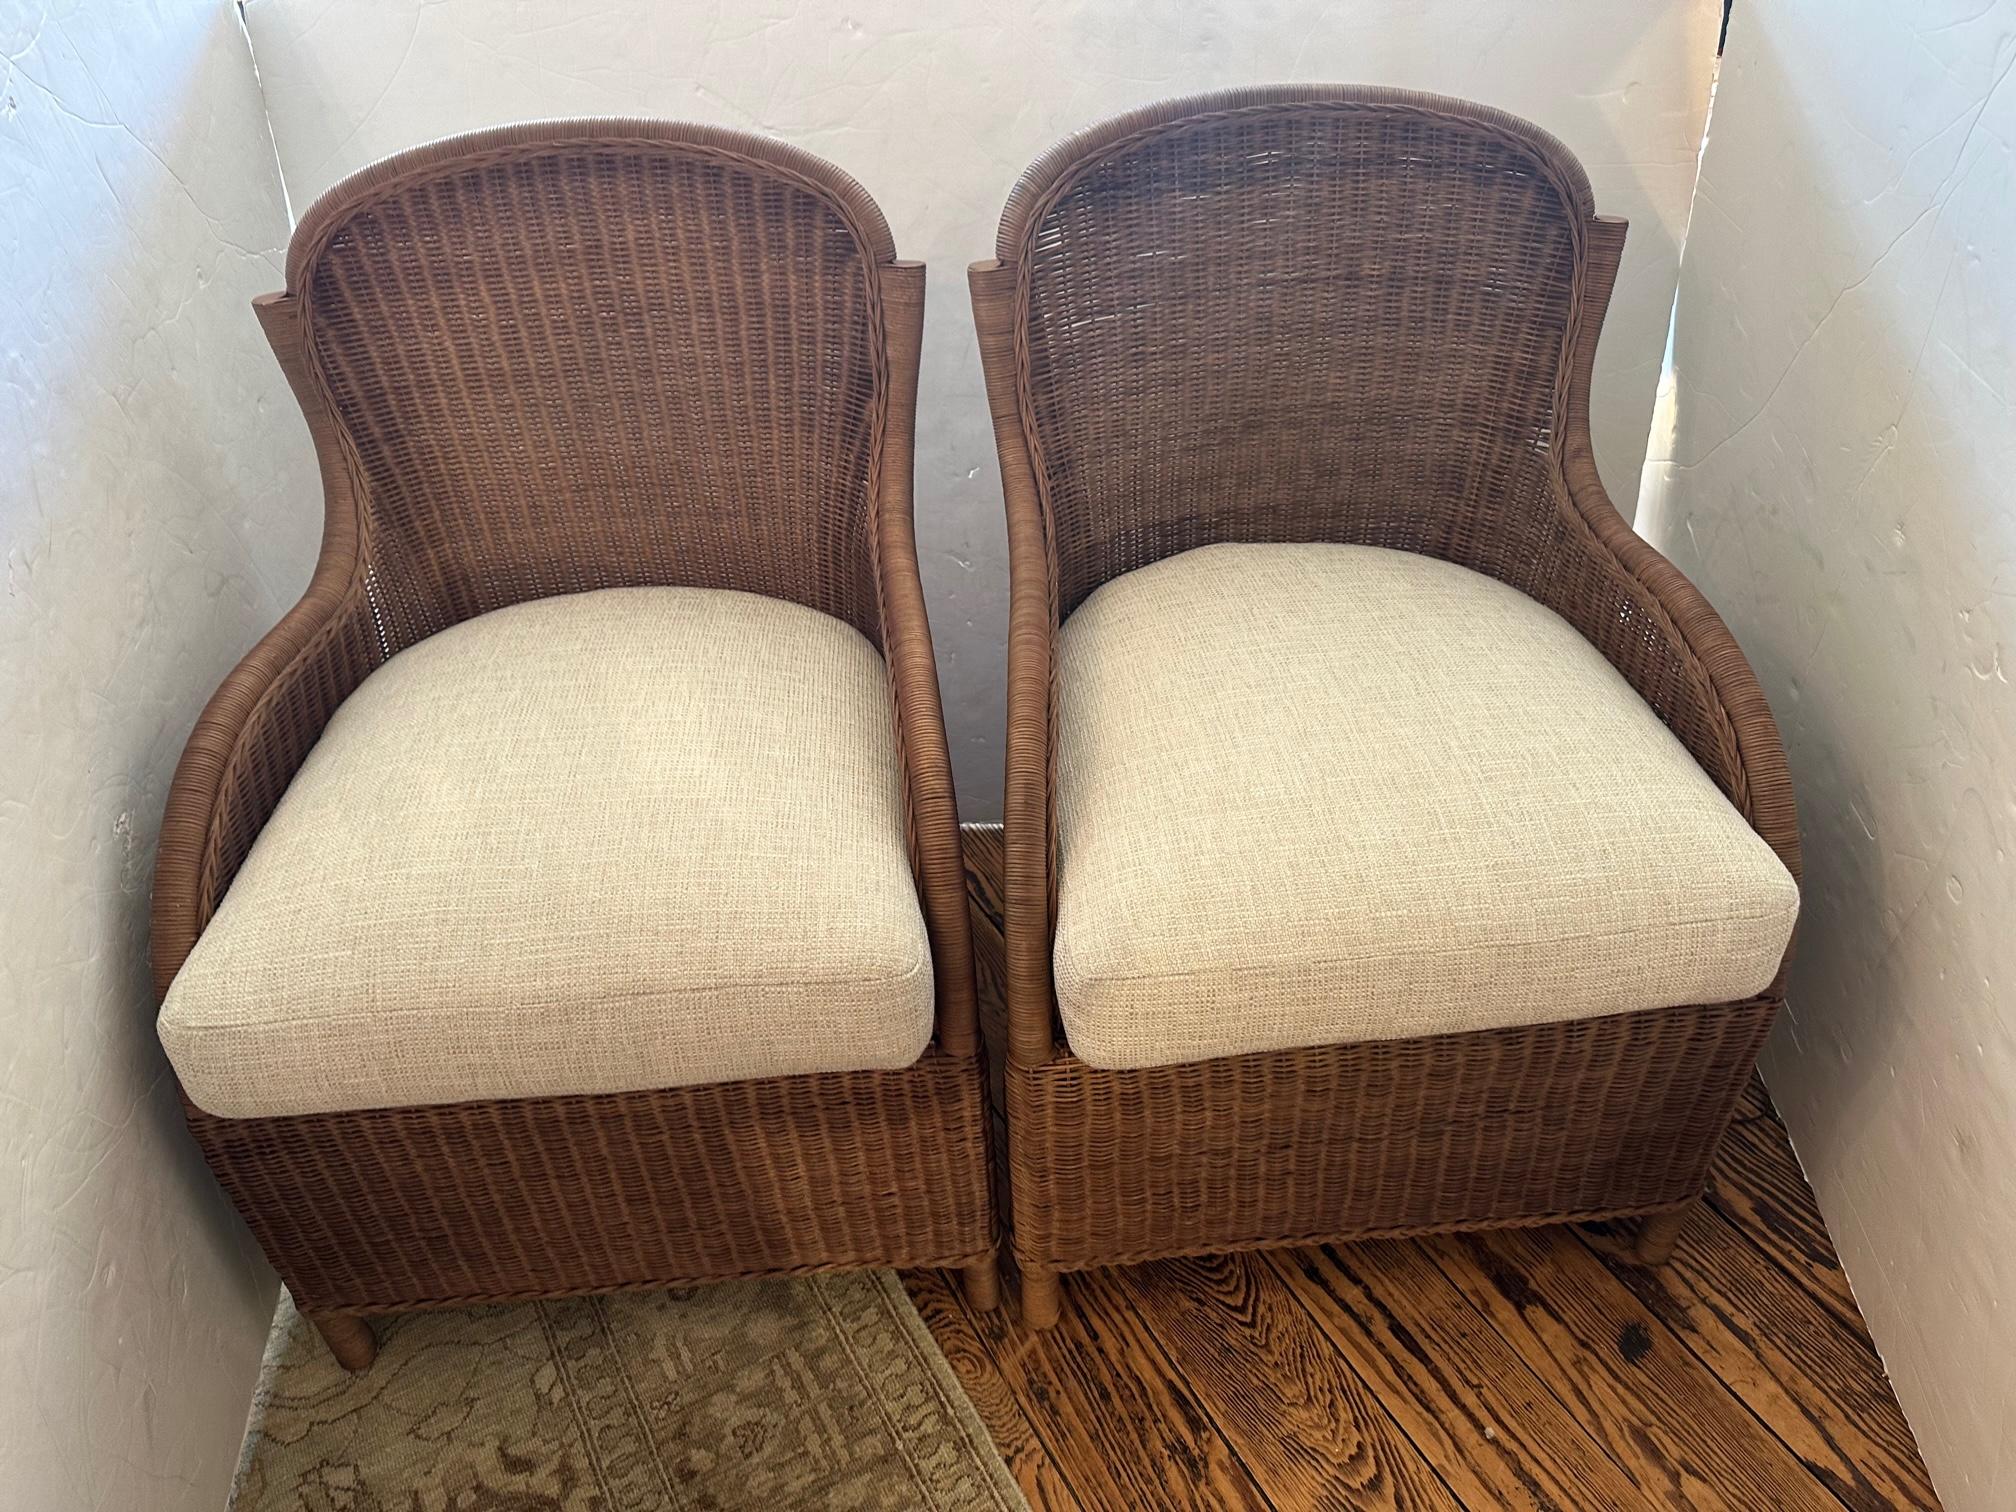 Contemporary Pair of E J Victor Brown Wicker and Neutral Upholstered Seat & Back Cushions For Sale